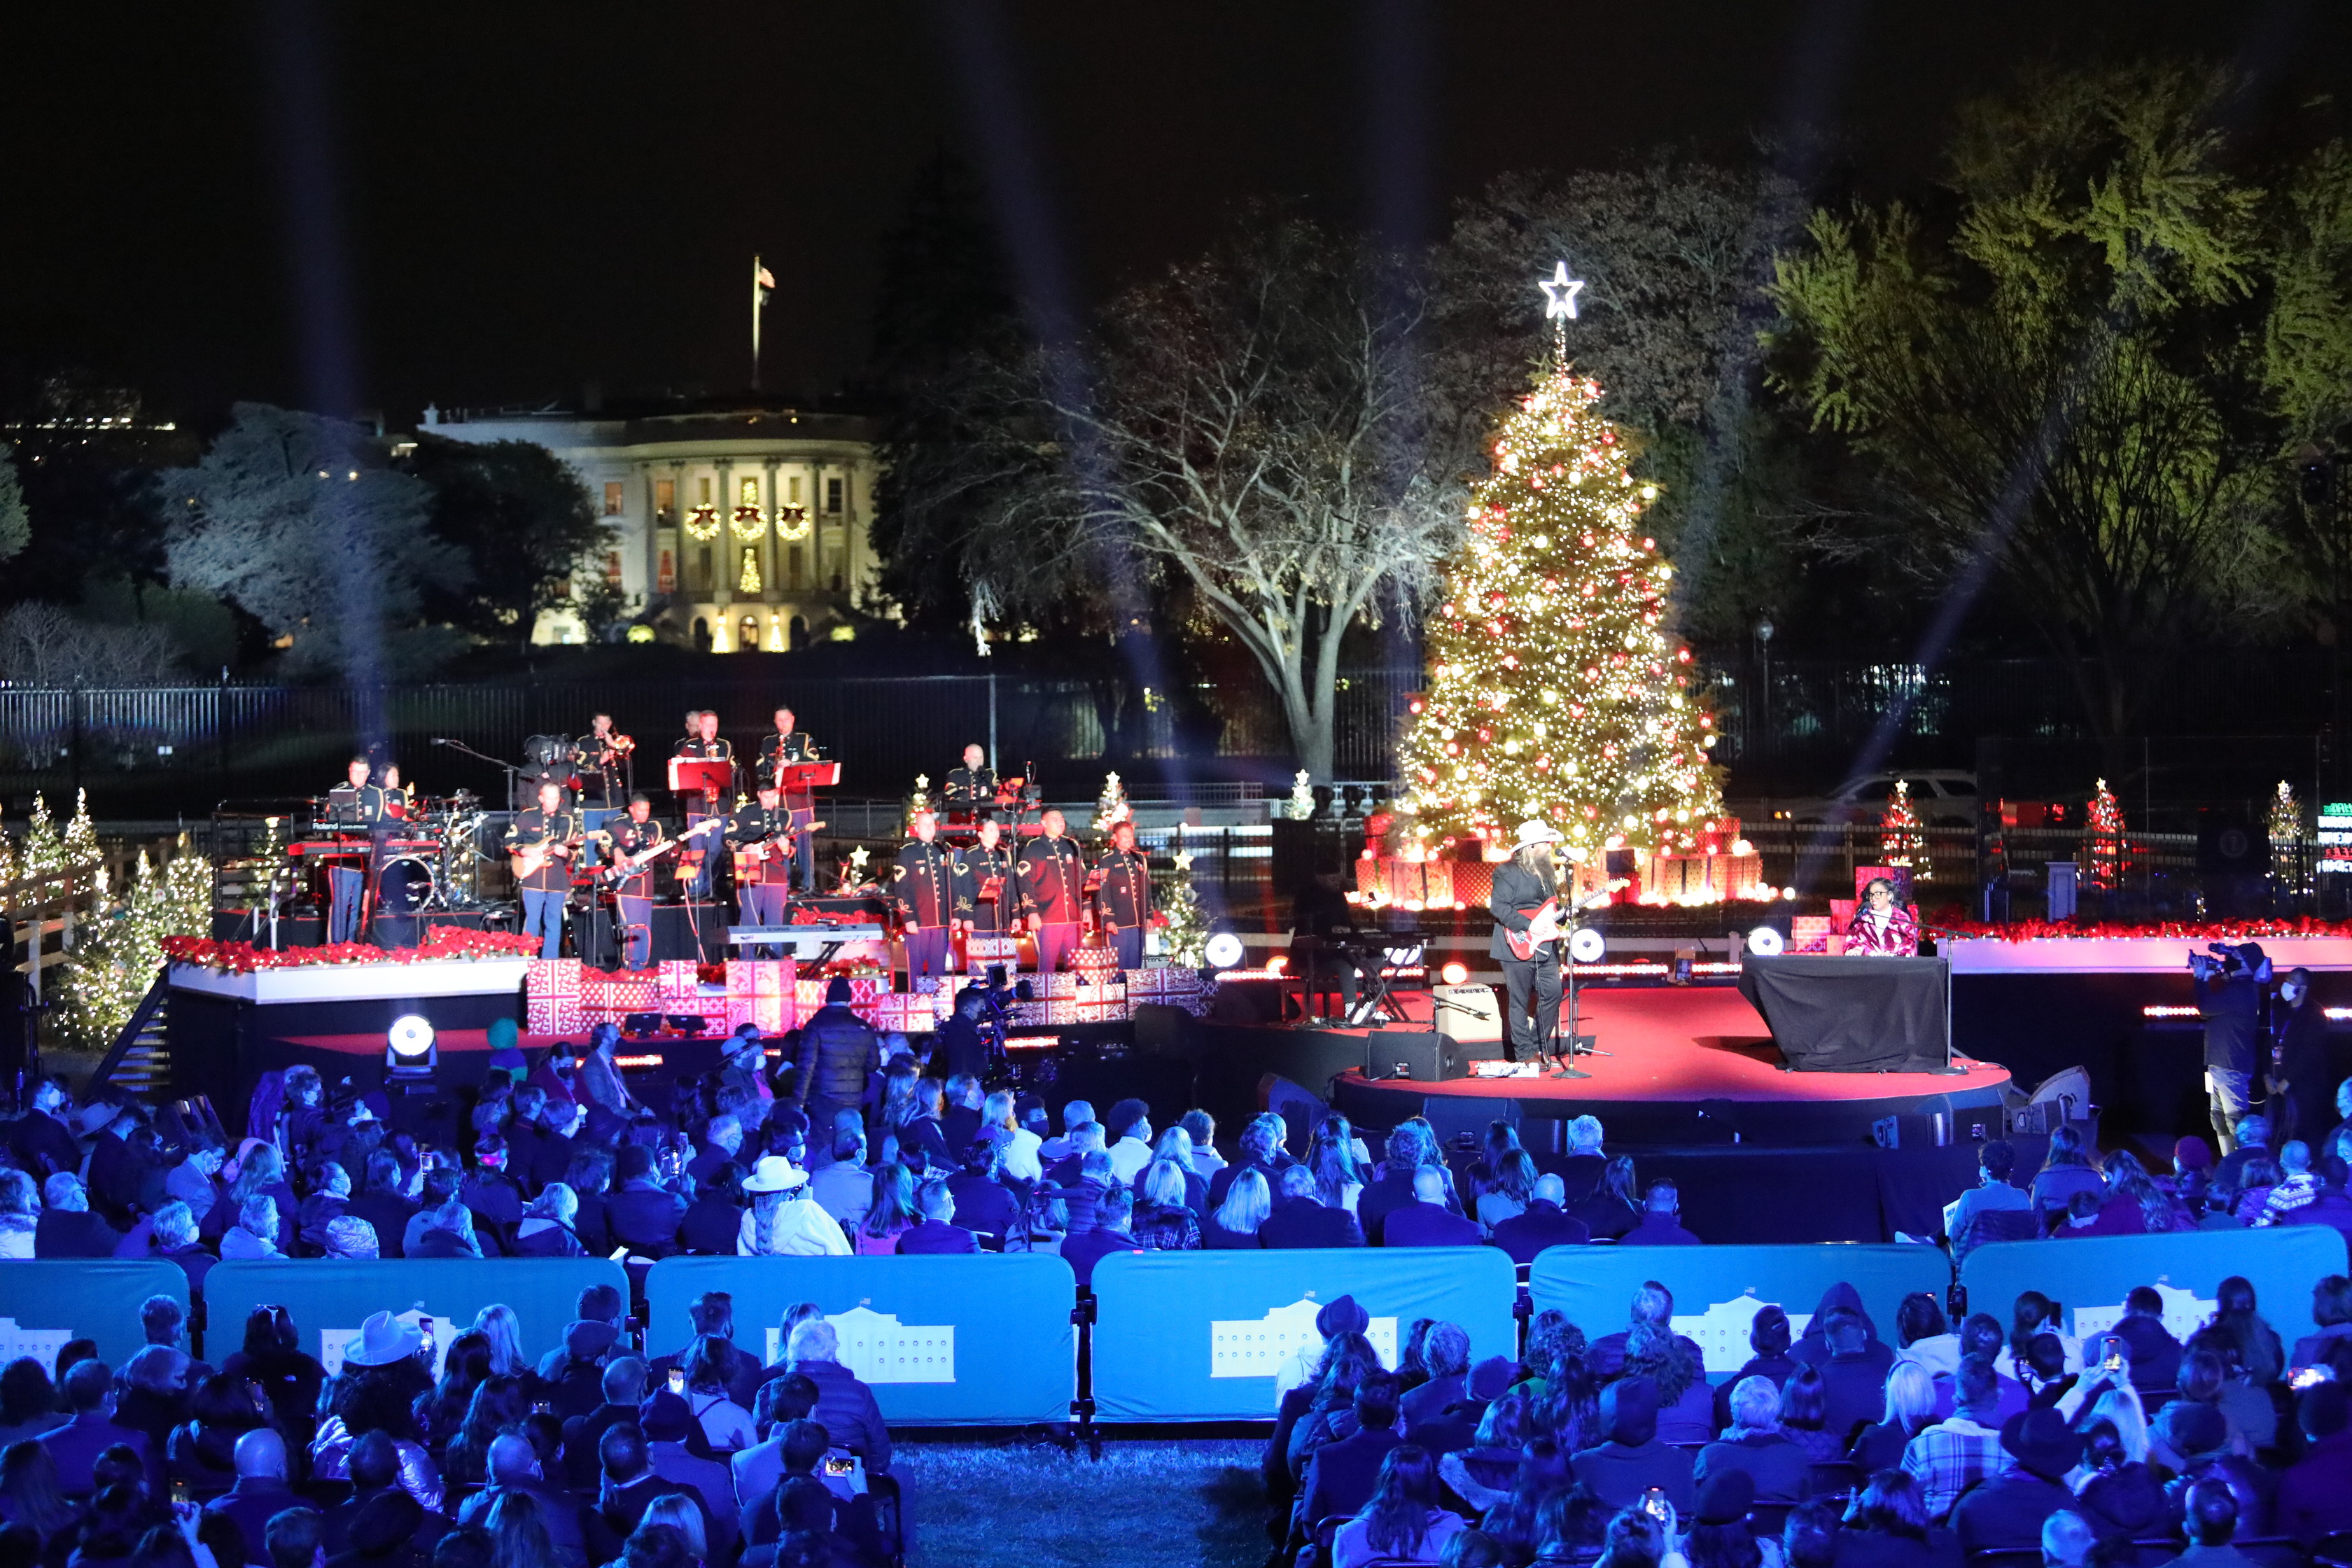 The National Christmas Tree is lit with the White House in the background. The forefront of the image is the stage with performers and the audience.